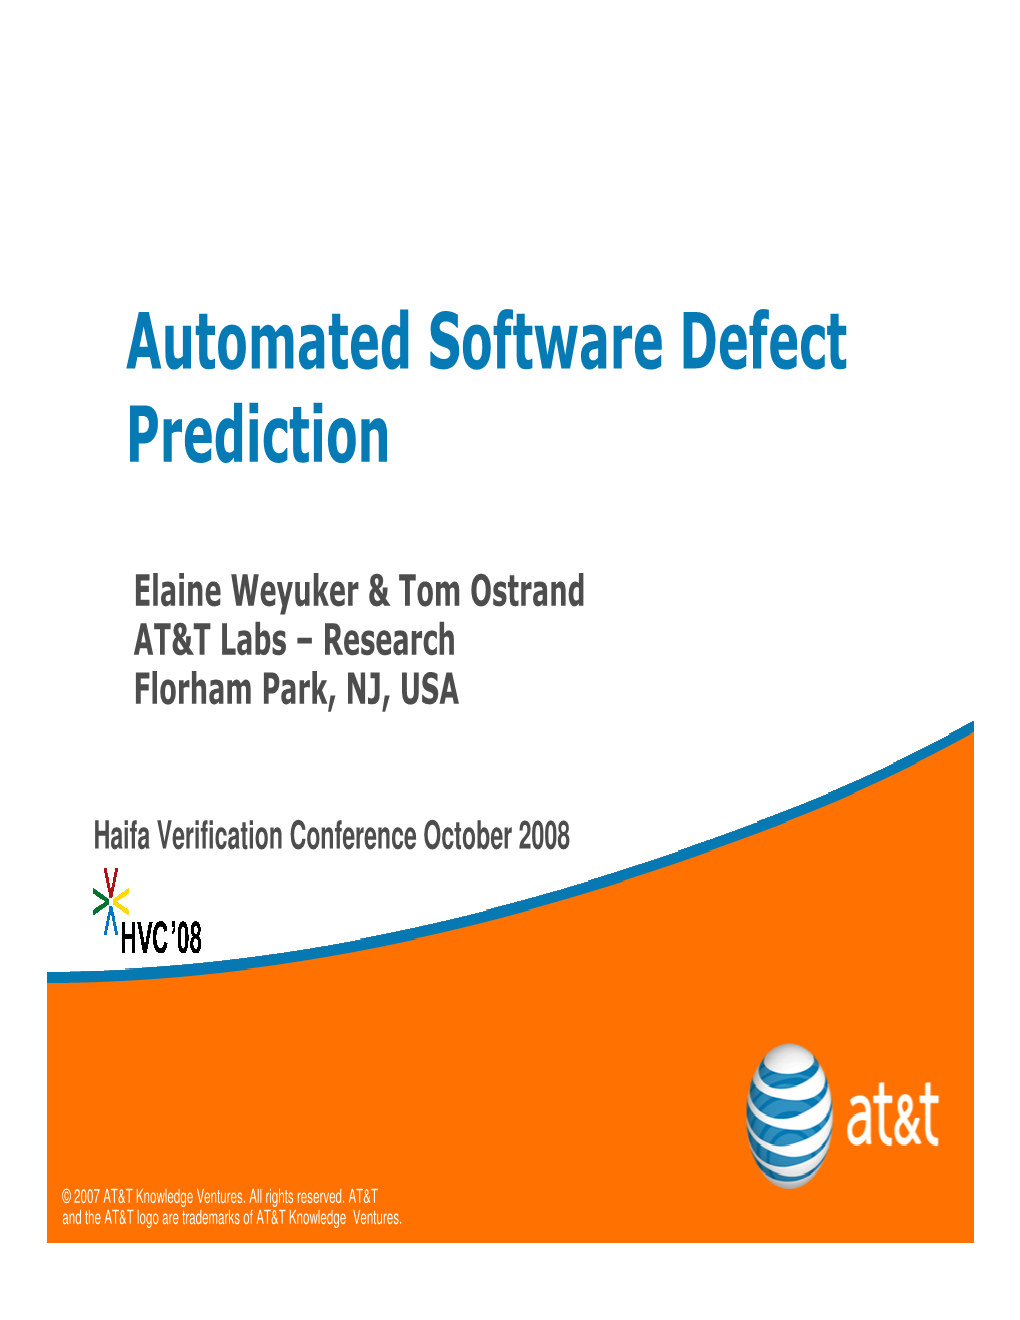 Automated Software Defect Prediction